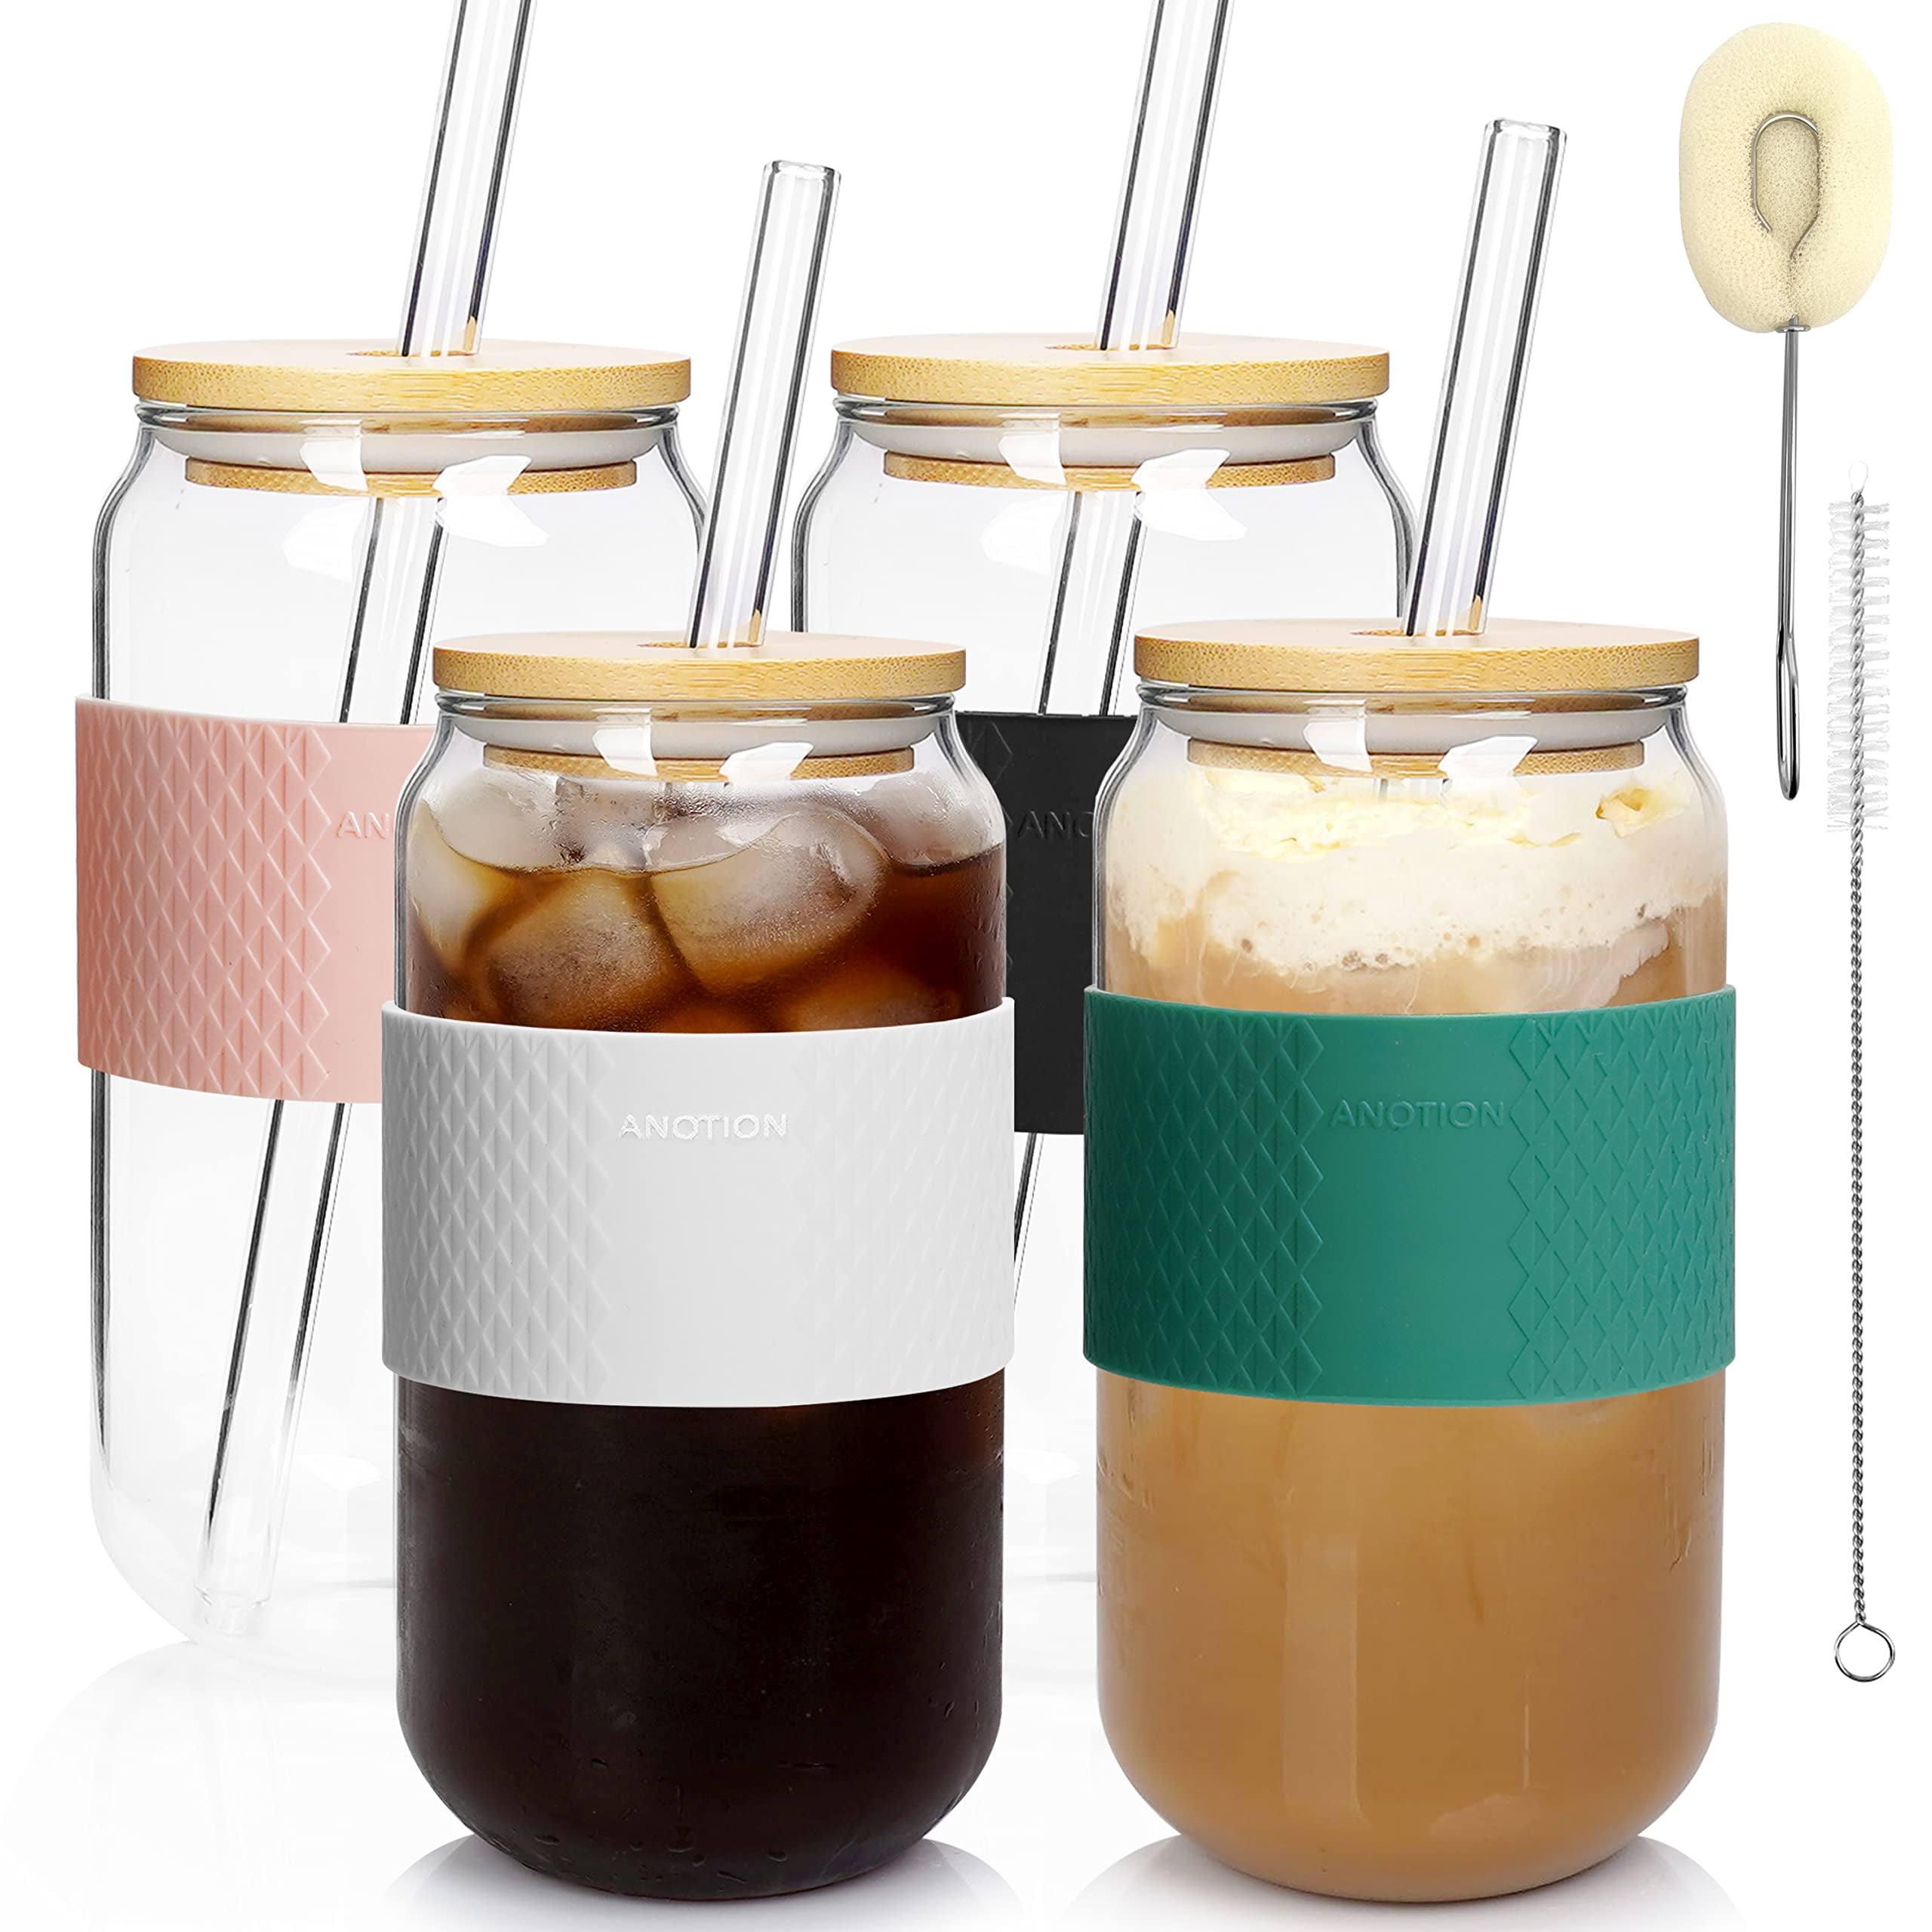 Elk and Friends 16 oz Mason Jar Cups with Silicone Lids + Silicone Straws |  Pint Glass Jars | Smoothie Cups | Drinking Glasses | Oats Container + Food